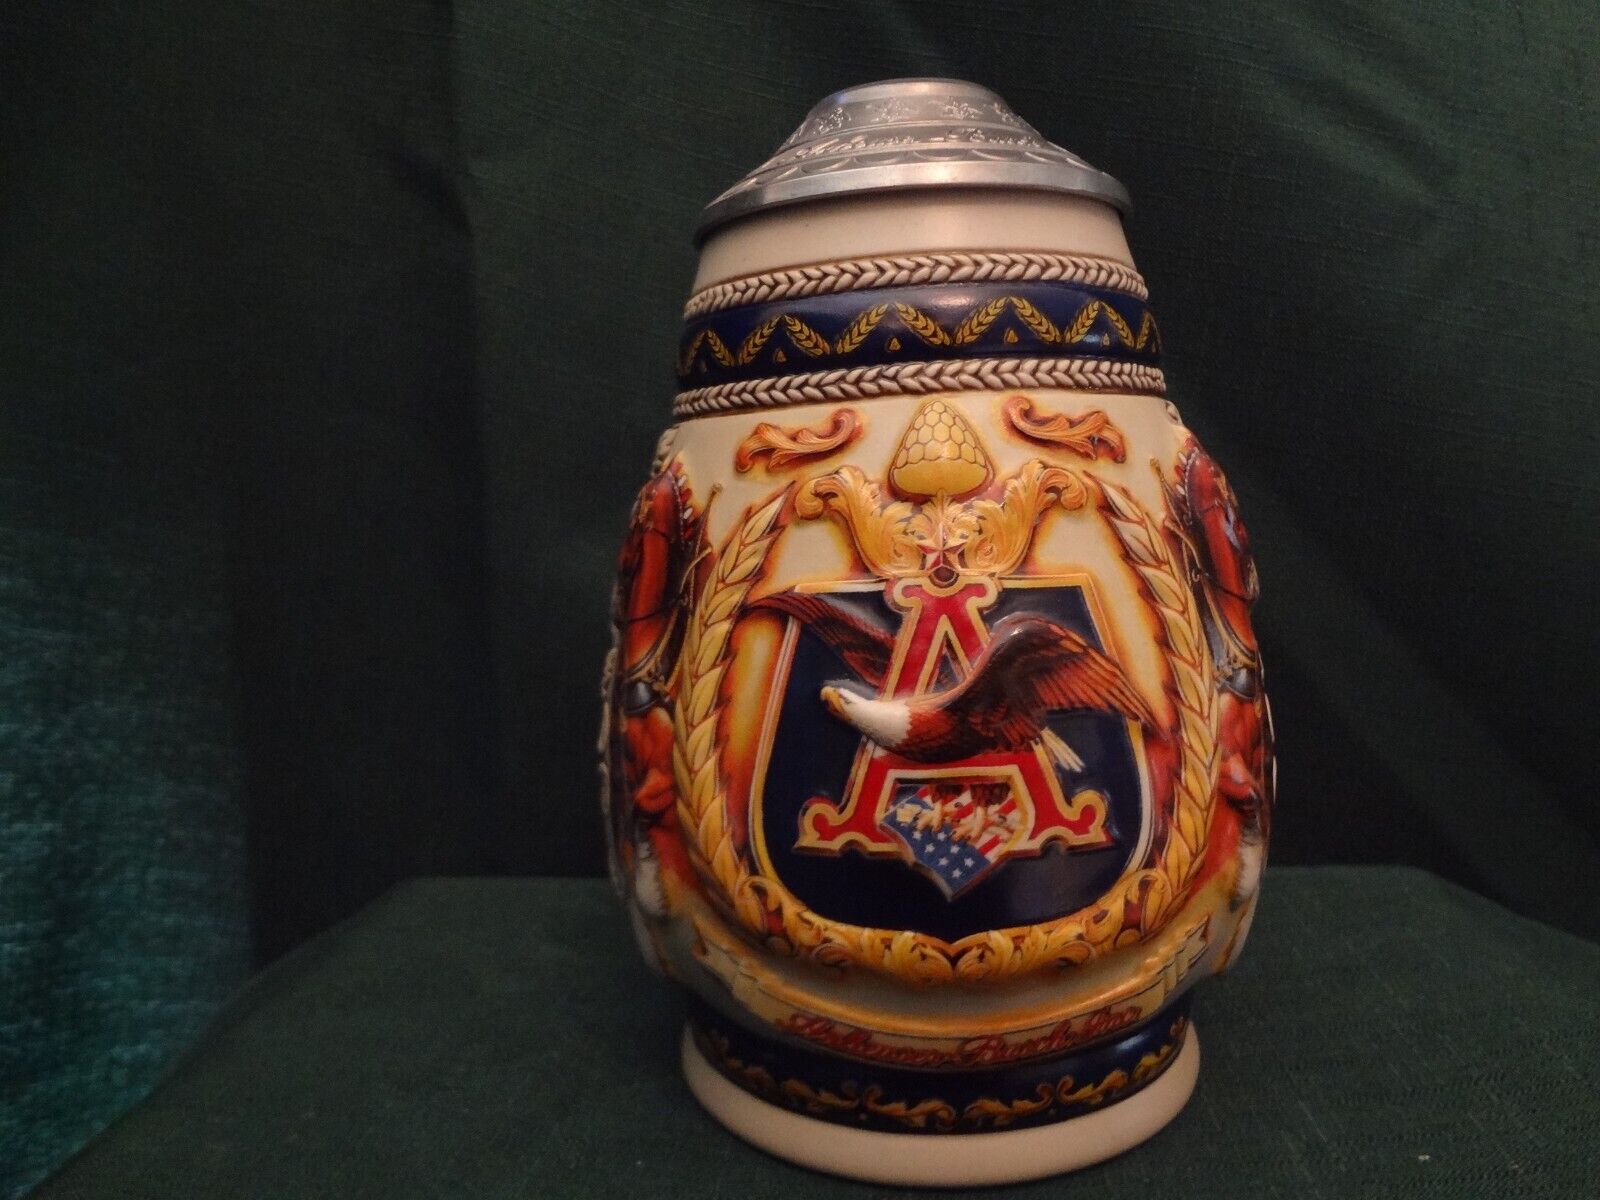 CB5 – 1997 MEMBERSHIP STEIN -  PRIDE AND TRADITION